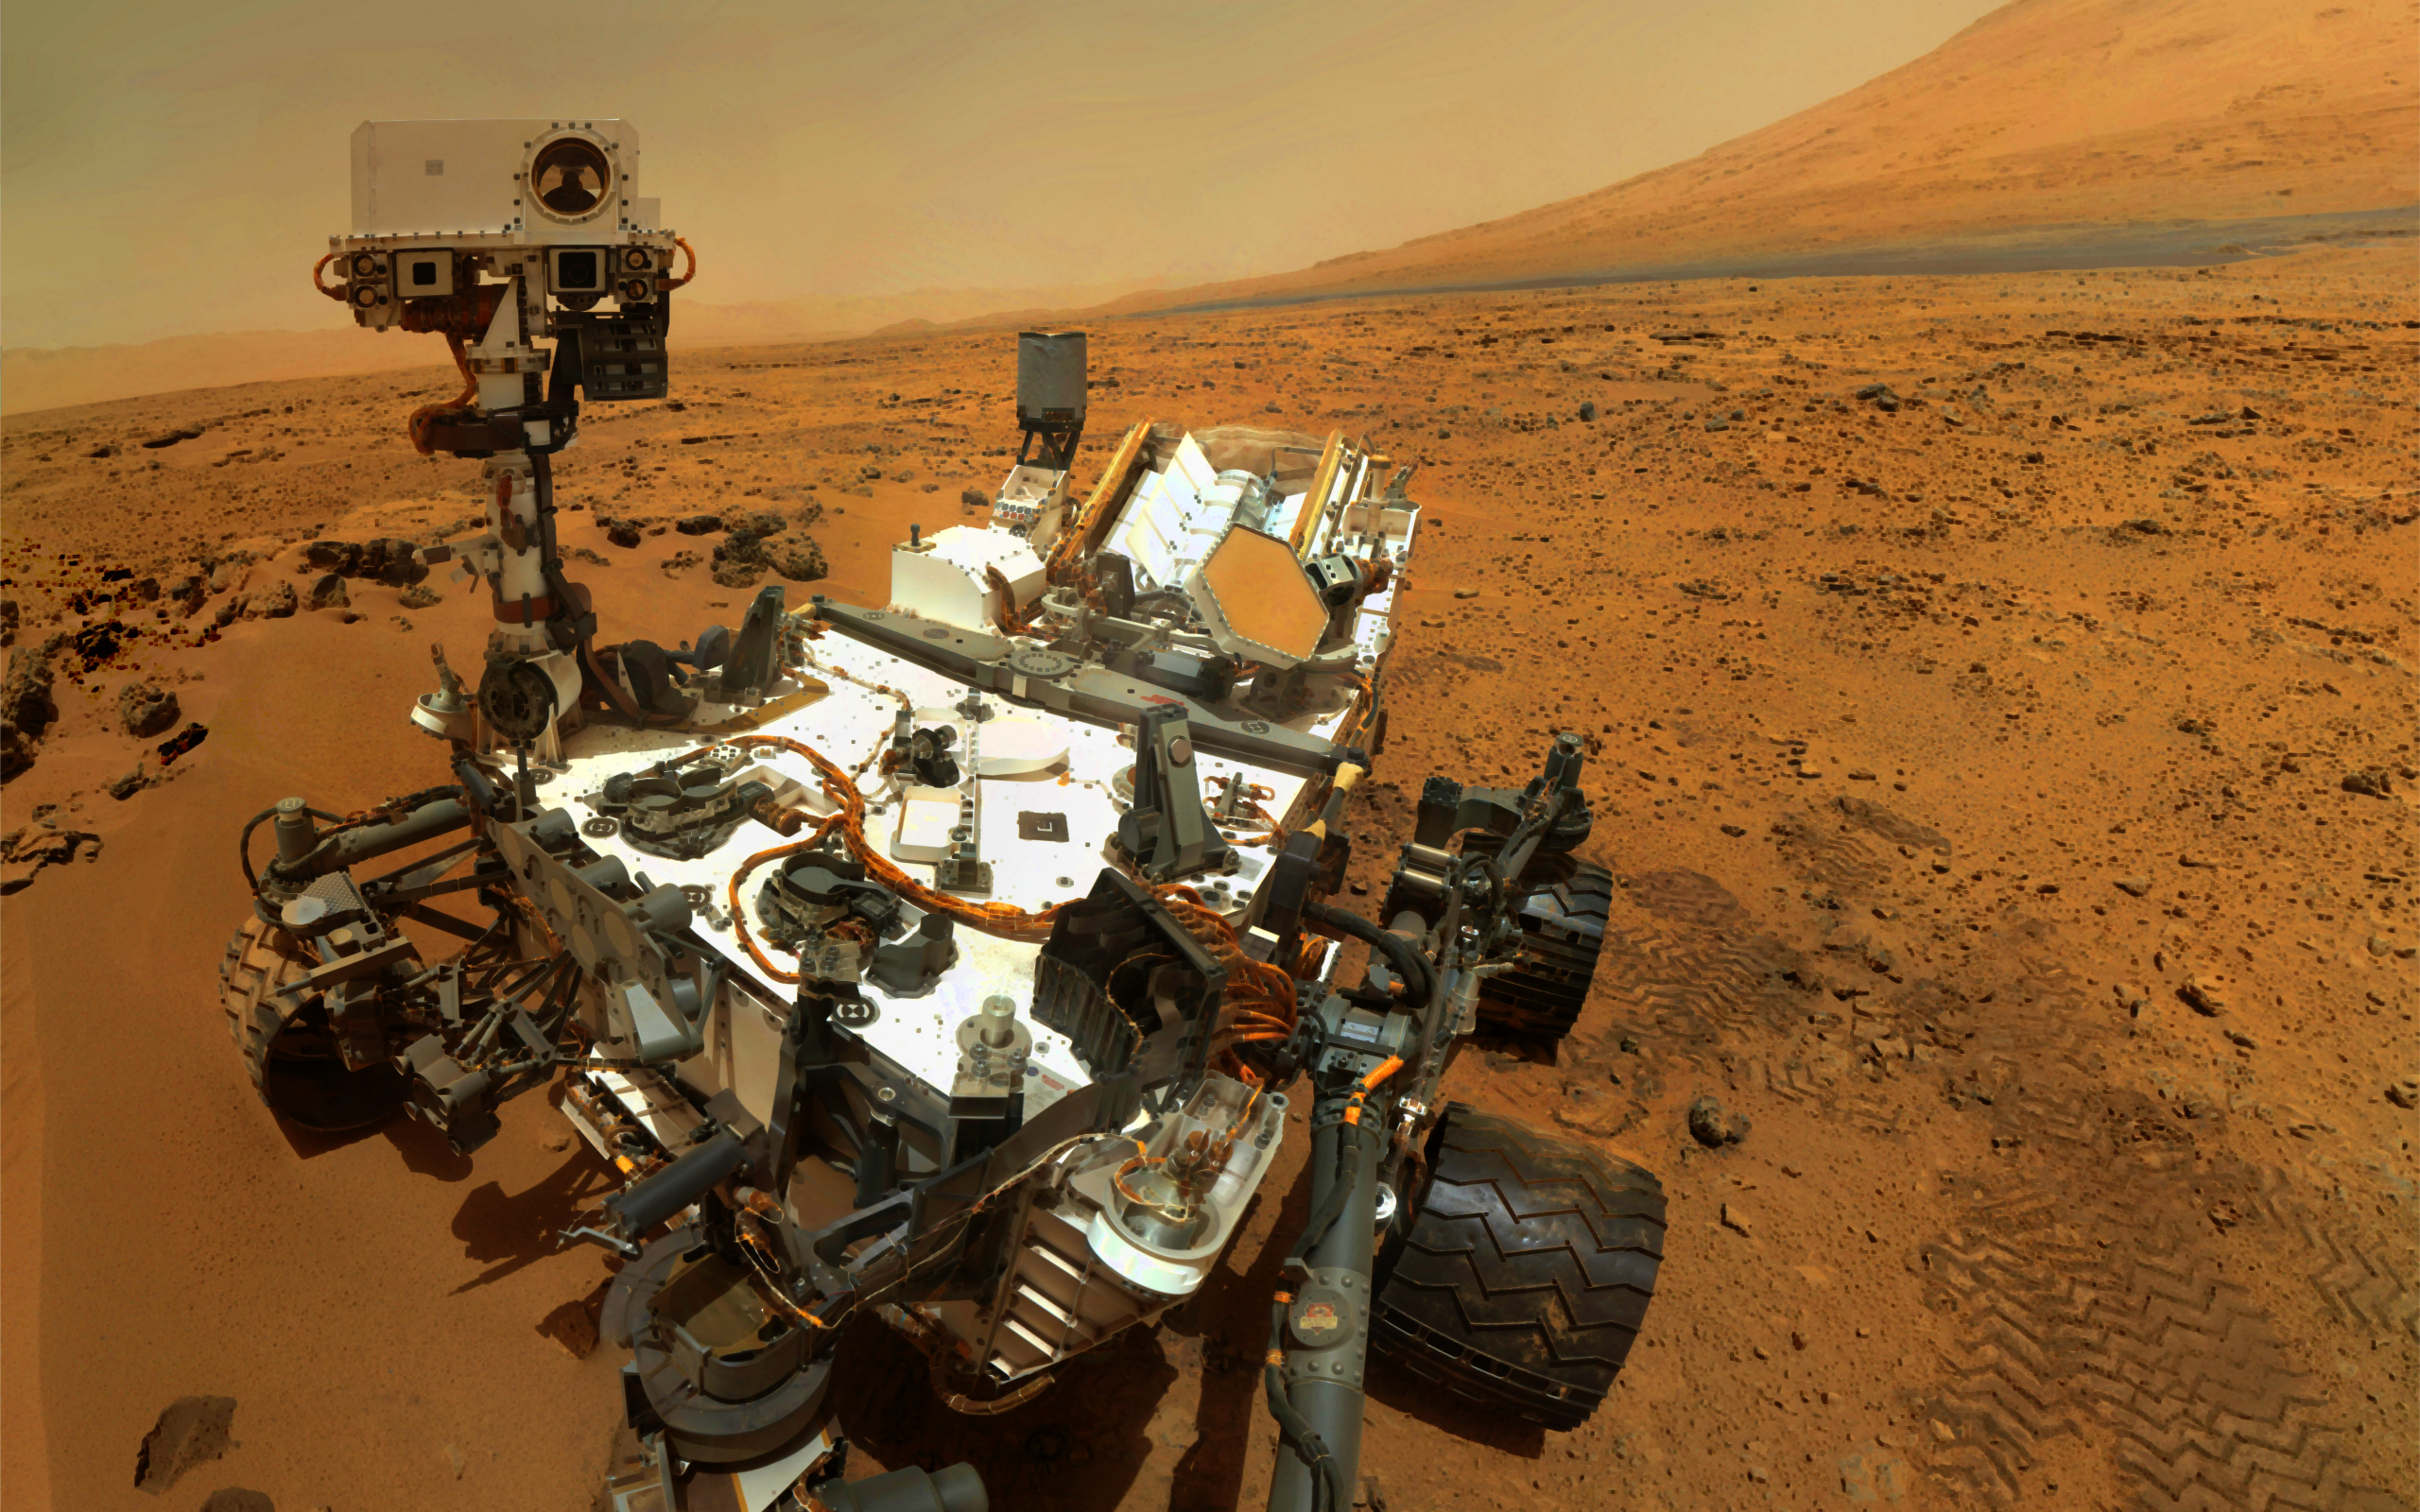 Curiosity Rover Lives! NASA Continues Data Gathering On Mars